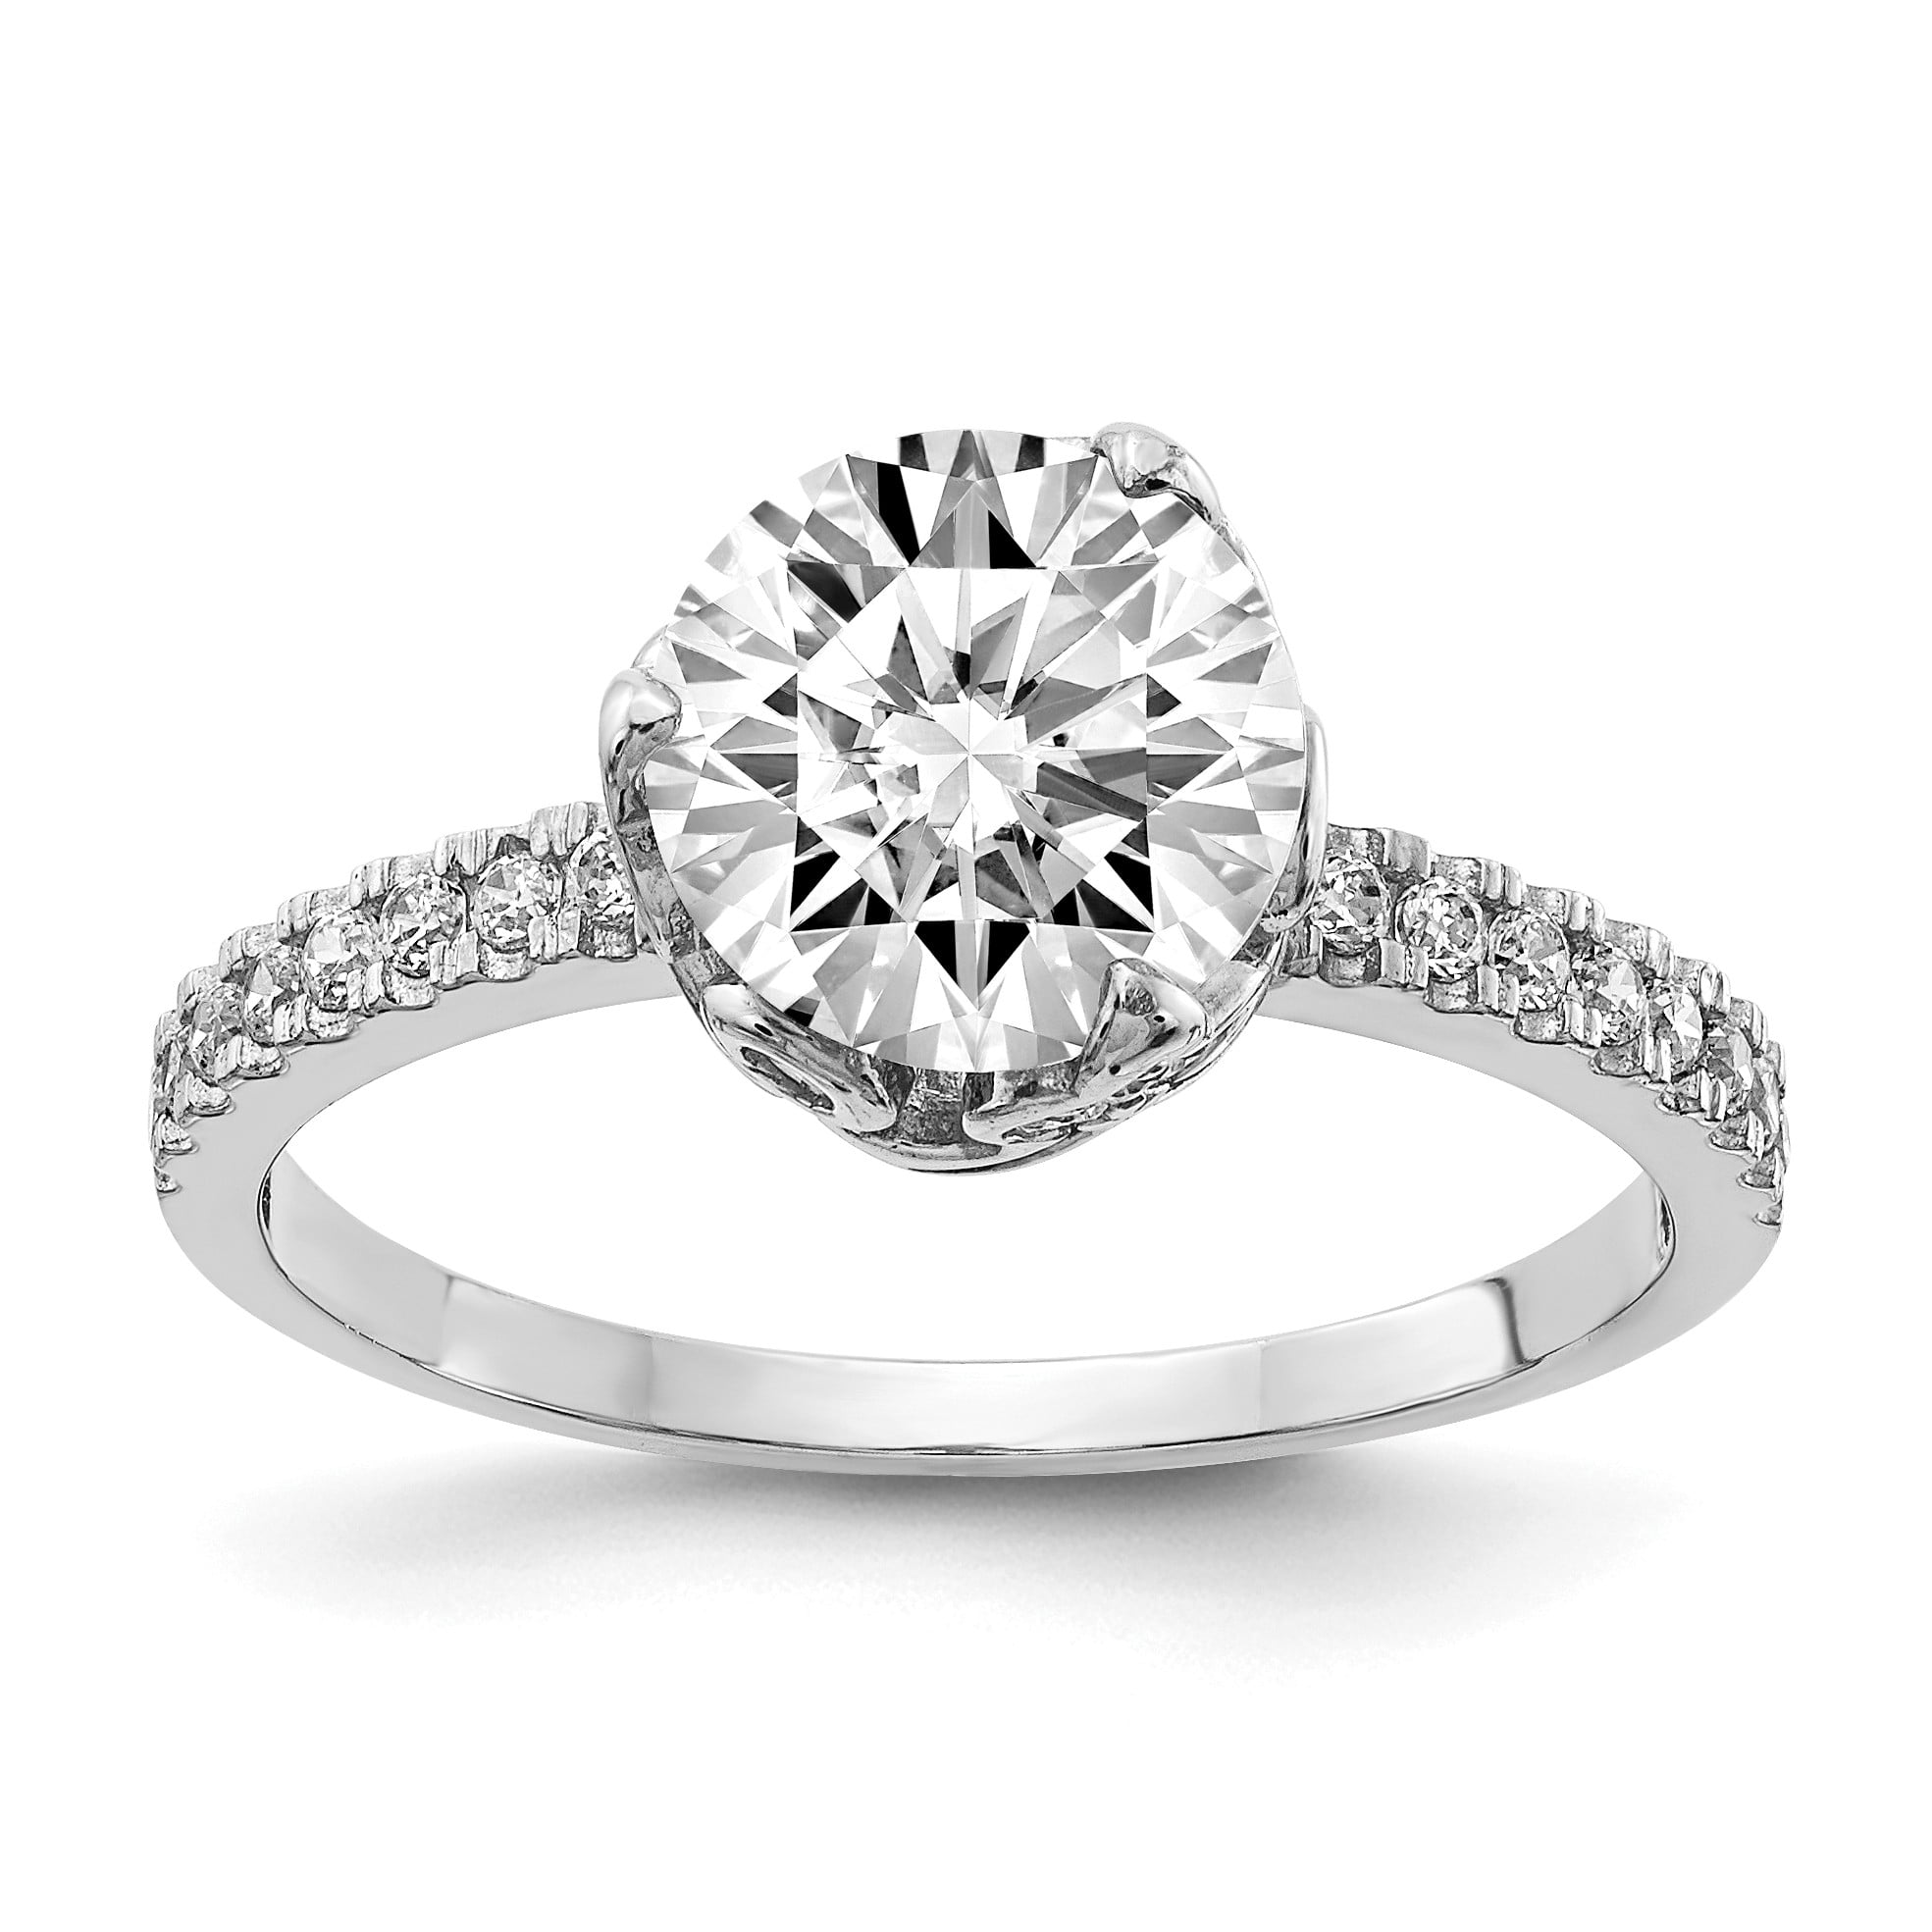 10K Tiara Collection White Gold Polished CZ Ring Size 7 Length Width